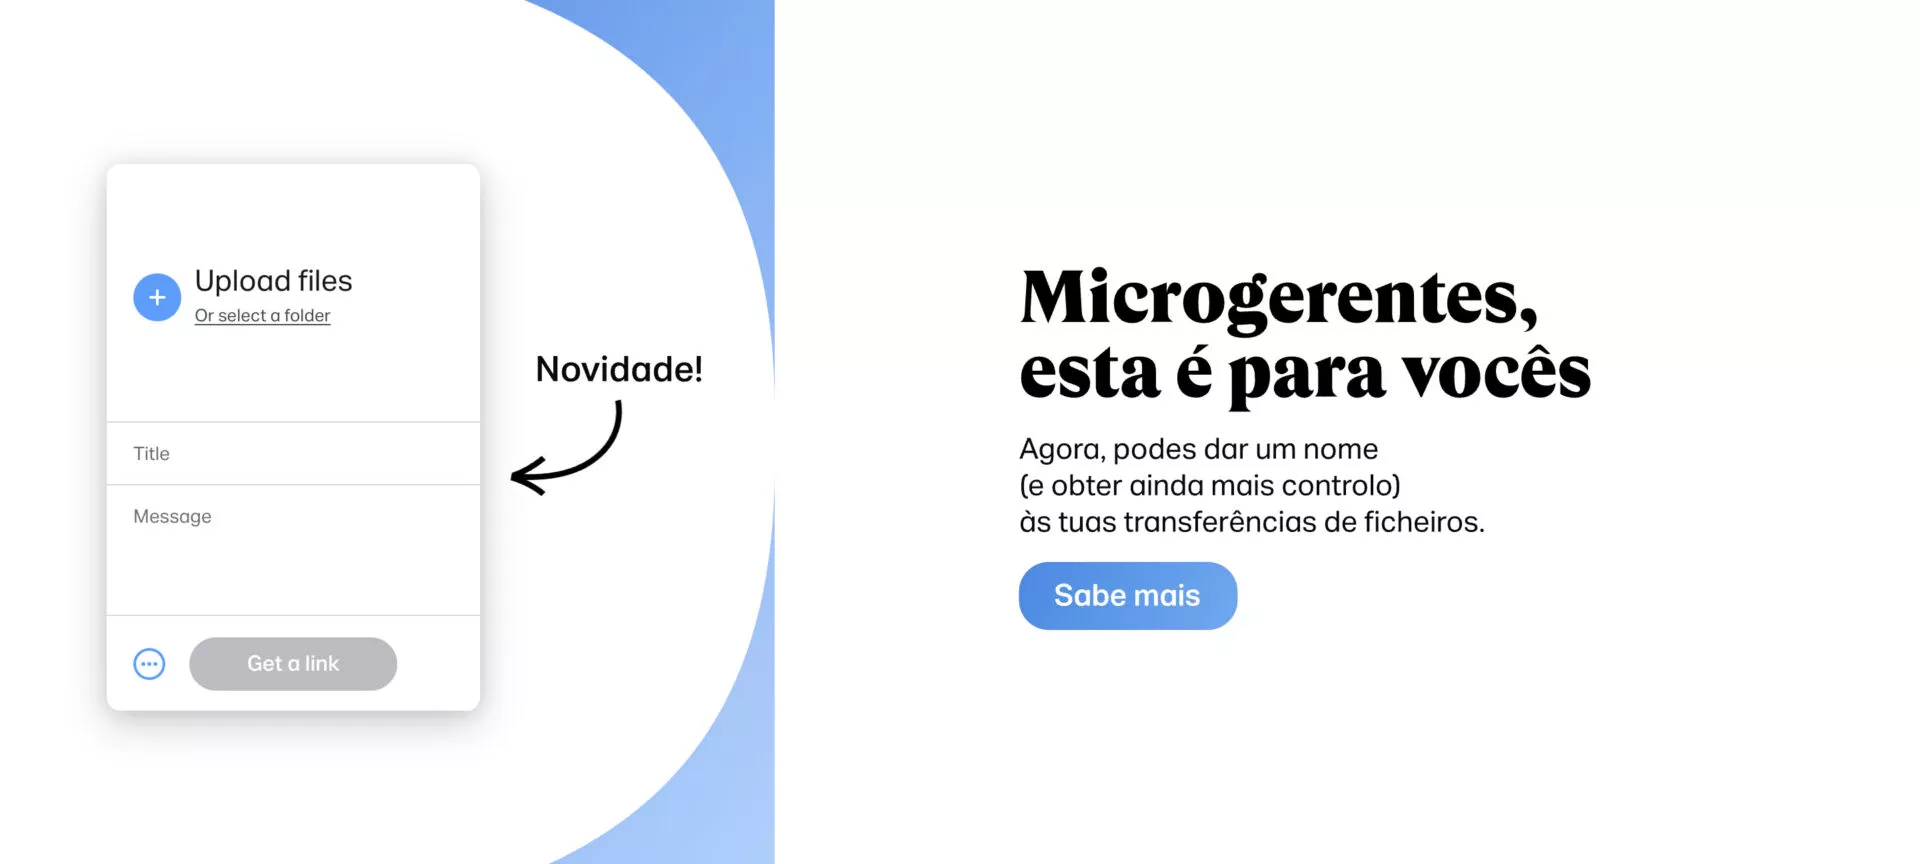 wetransfer is a popular server to send large files